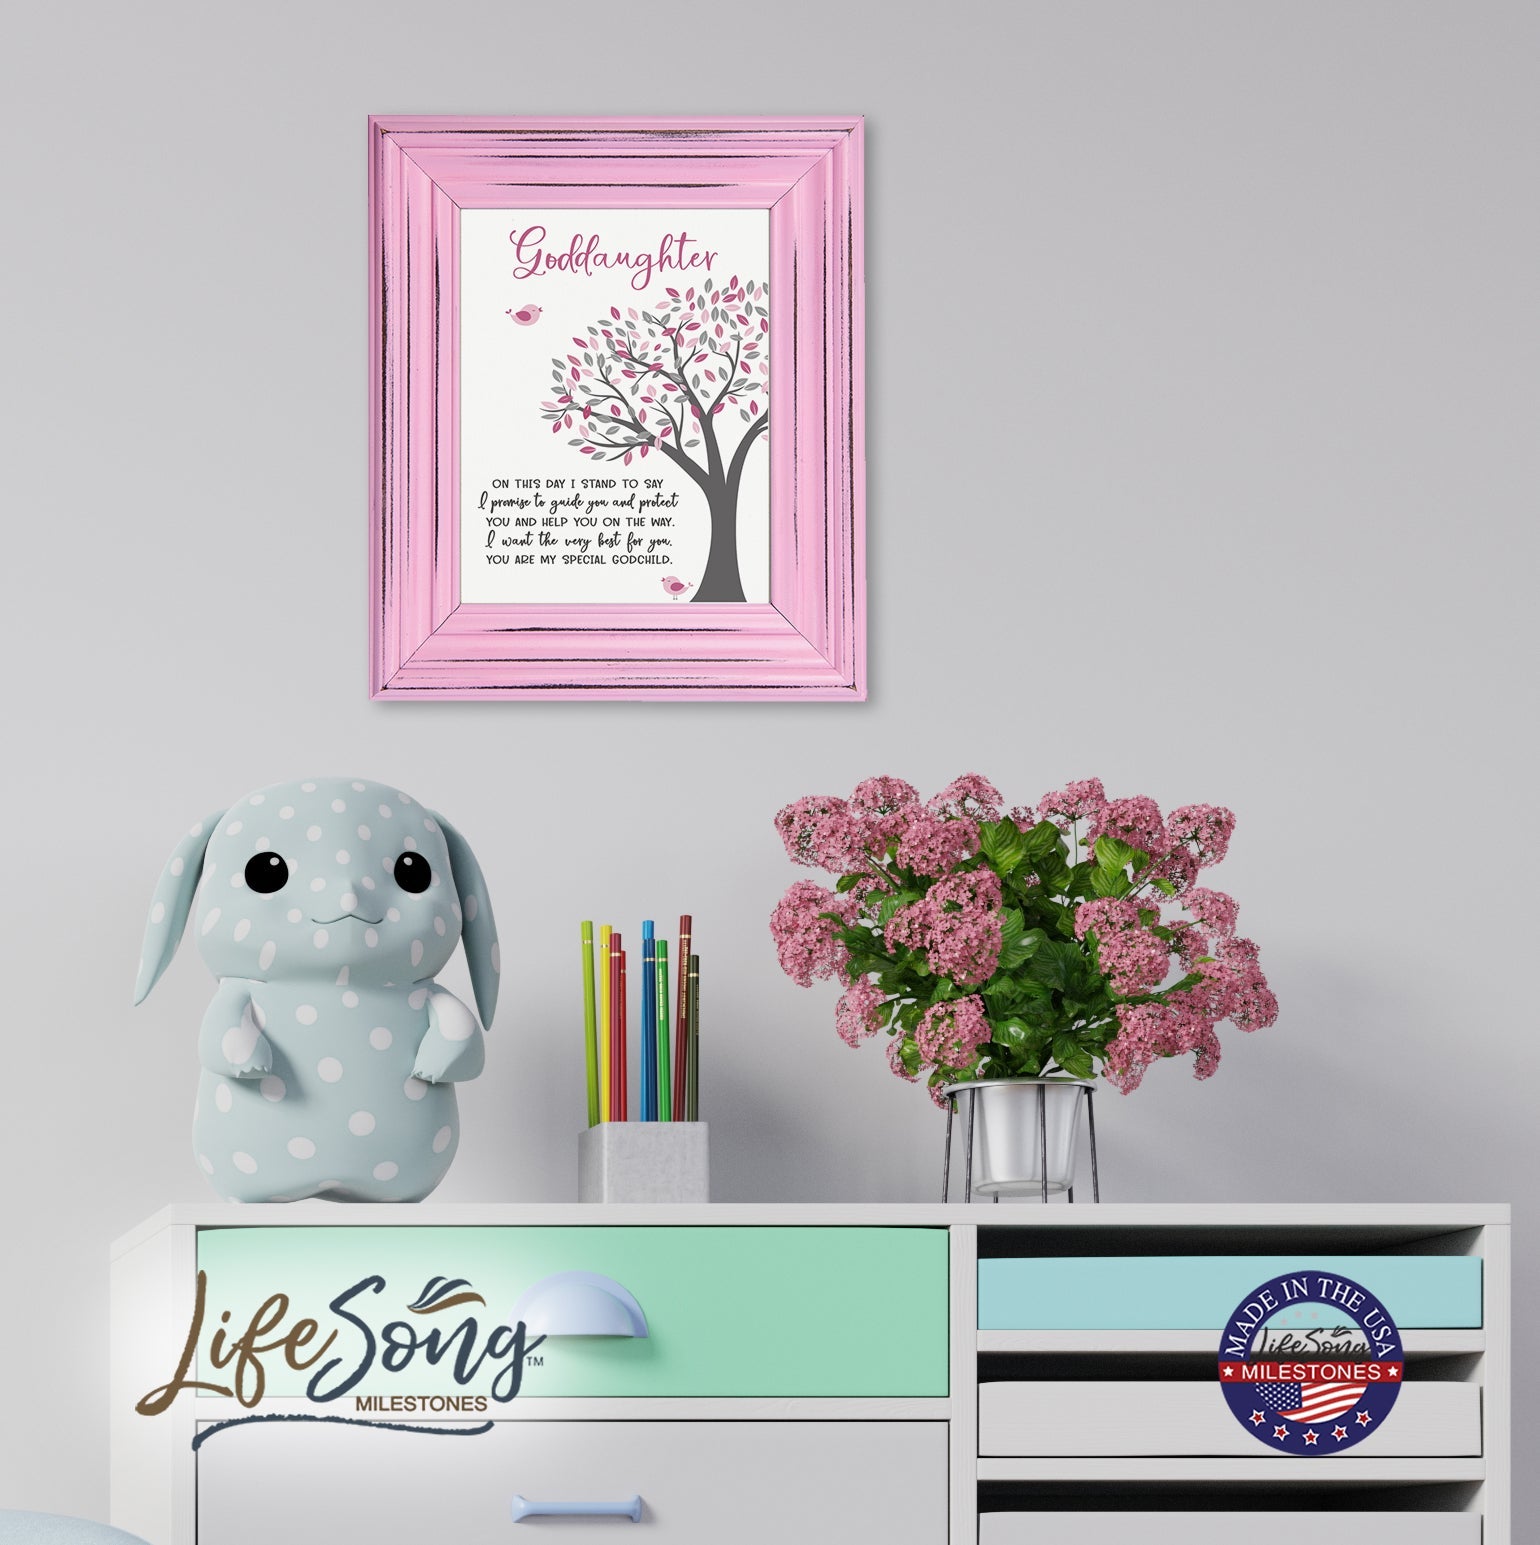 Godchild Framed Wall Signs - On This Day - LifeSong Milestones